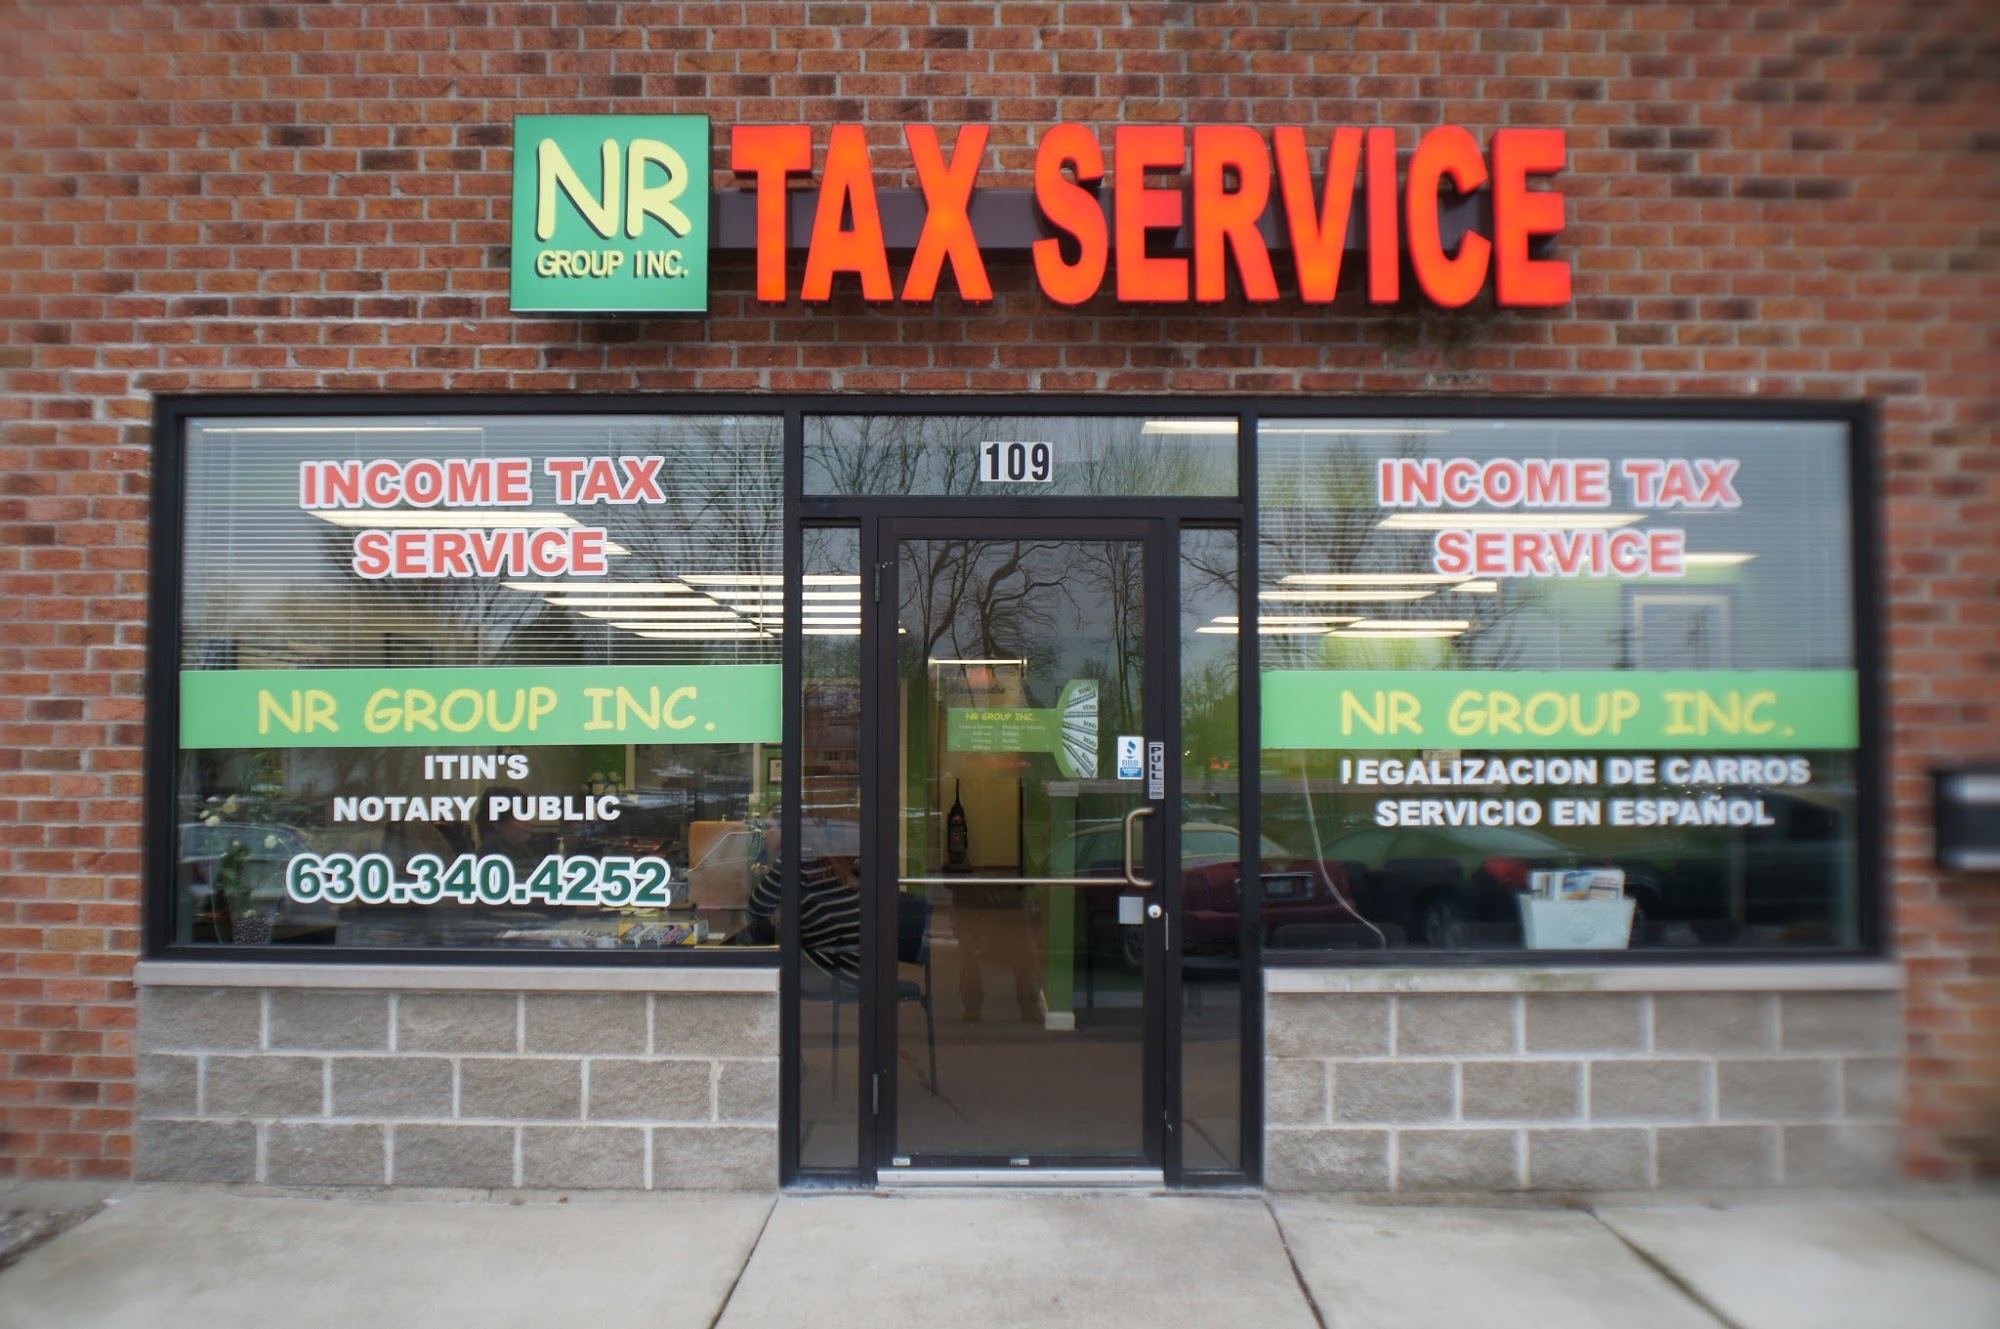 NR Group Tax Services, Inc